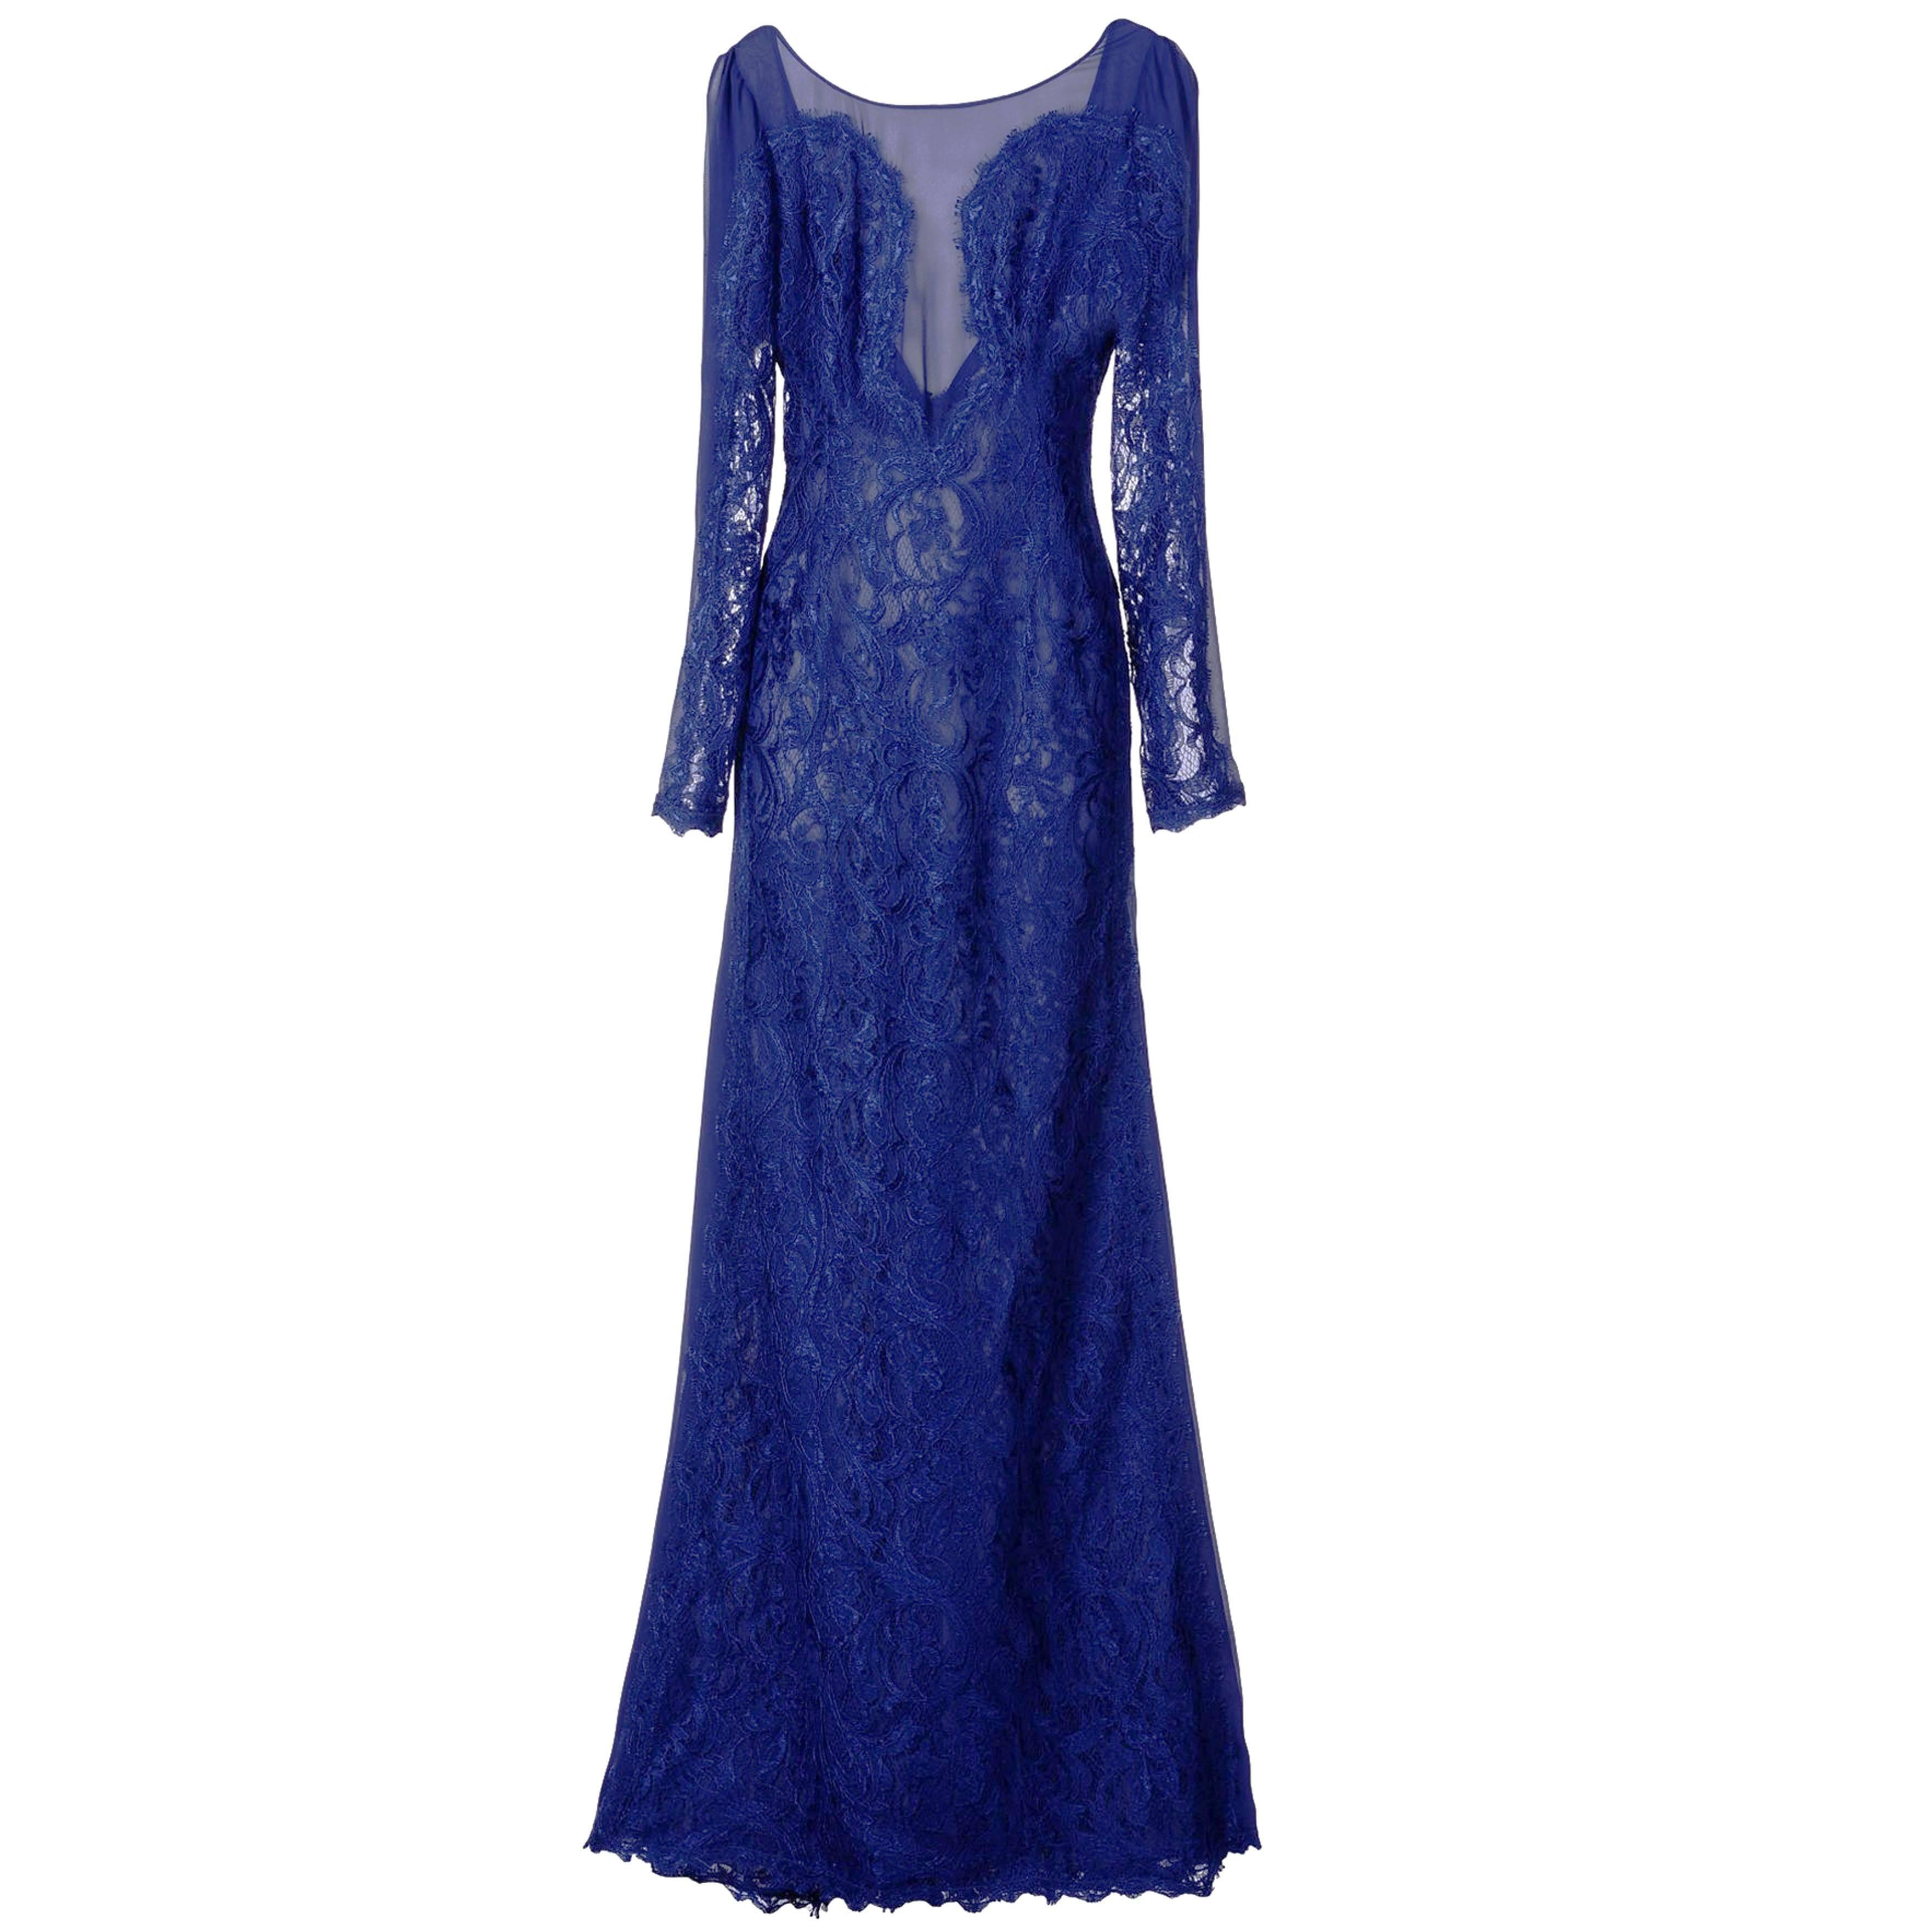 New Emilio Pucci Lace Cheer Blue Dress Gown It.40